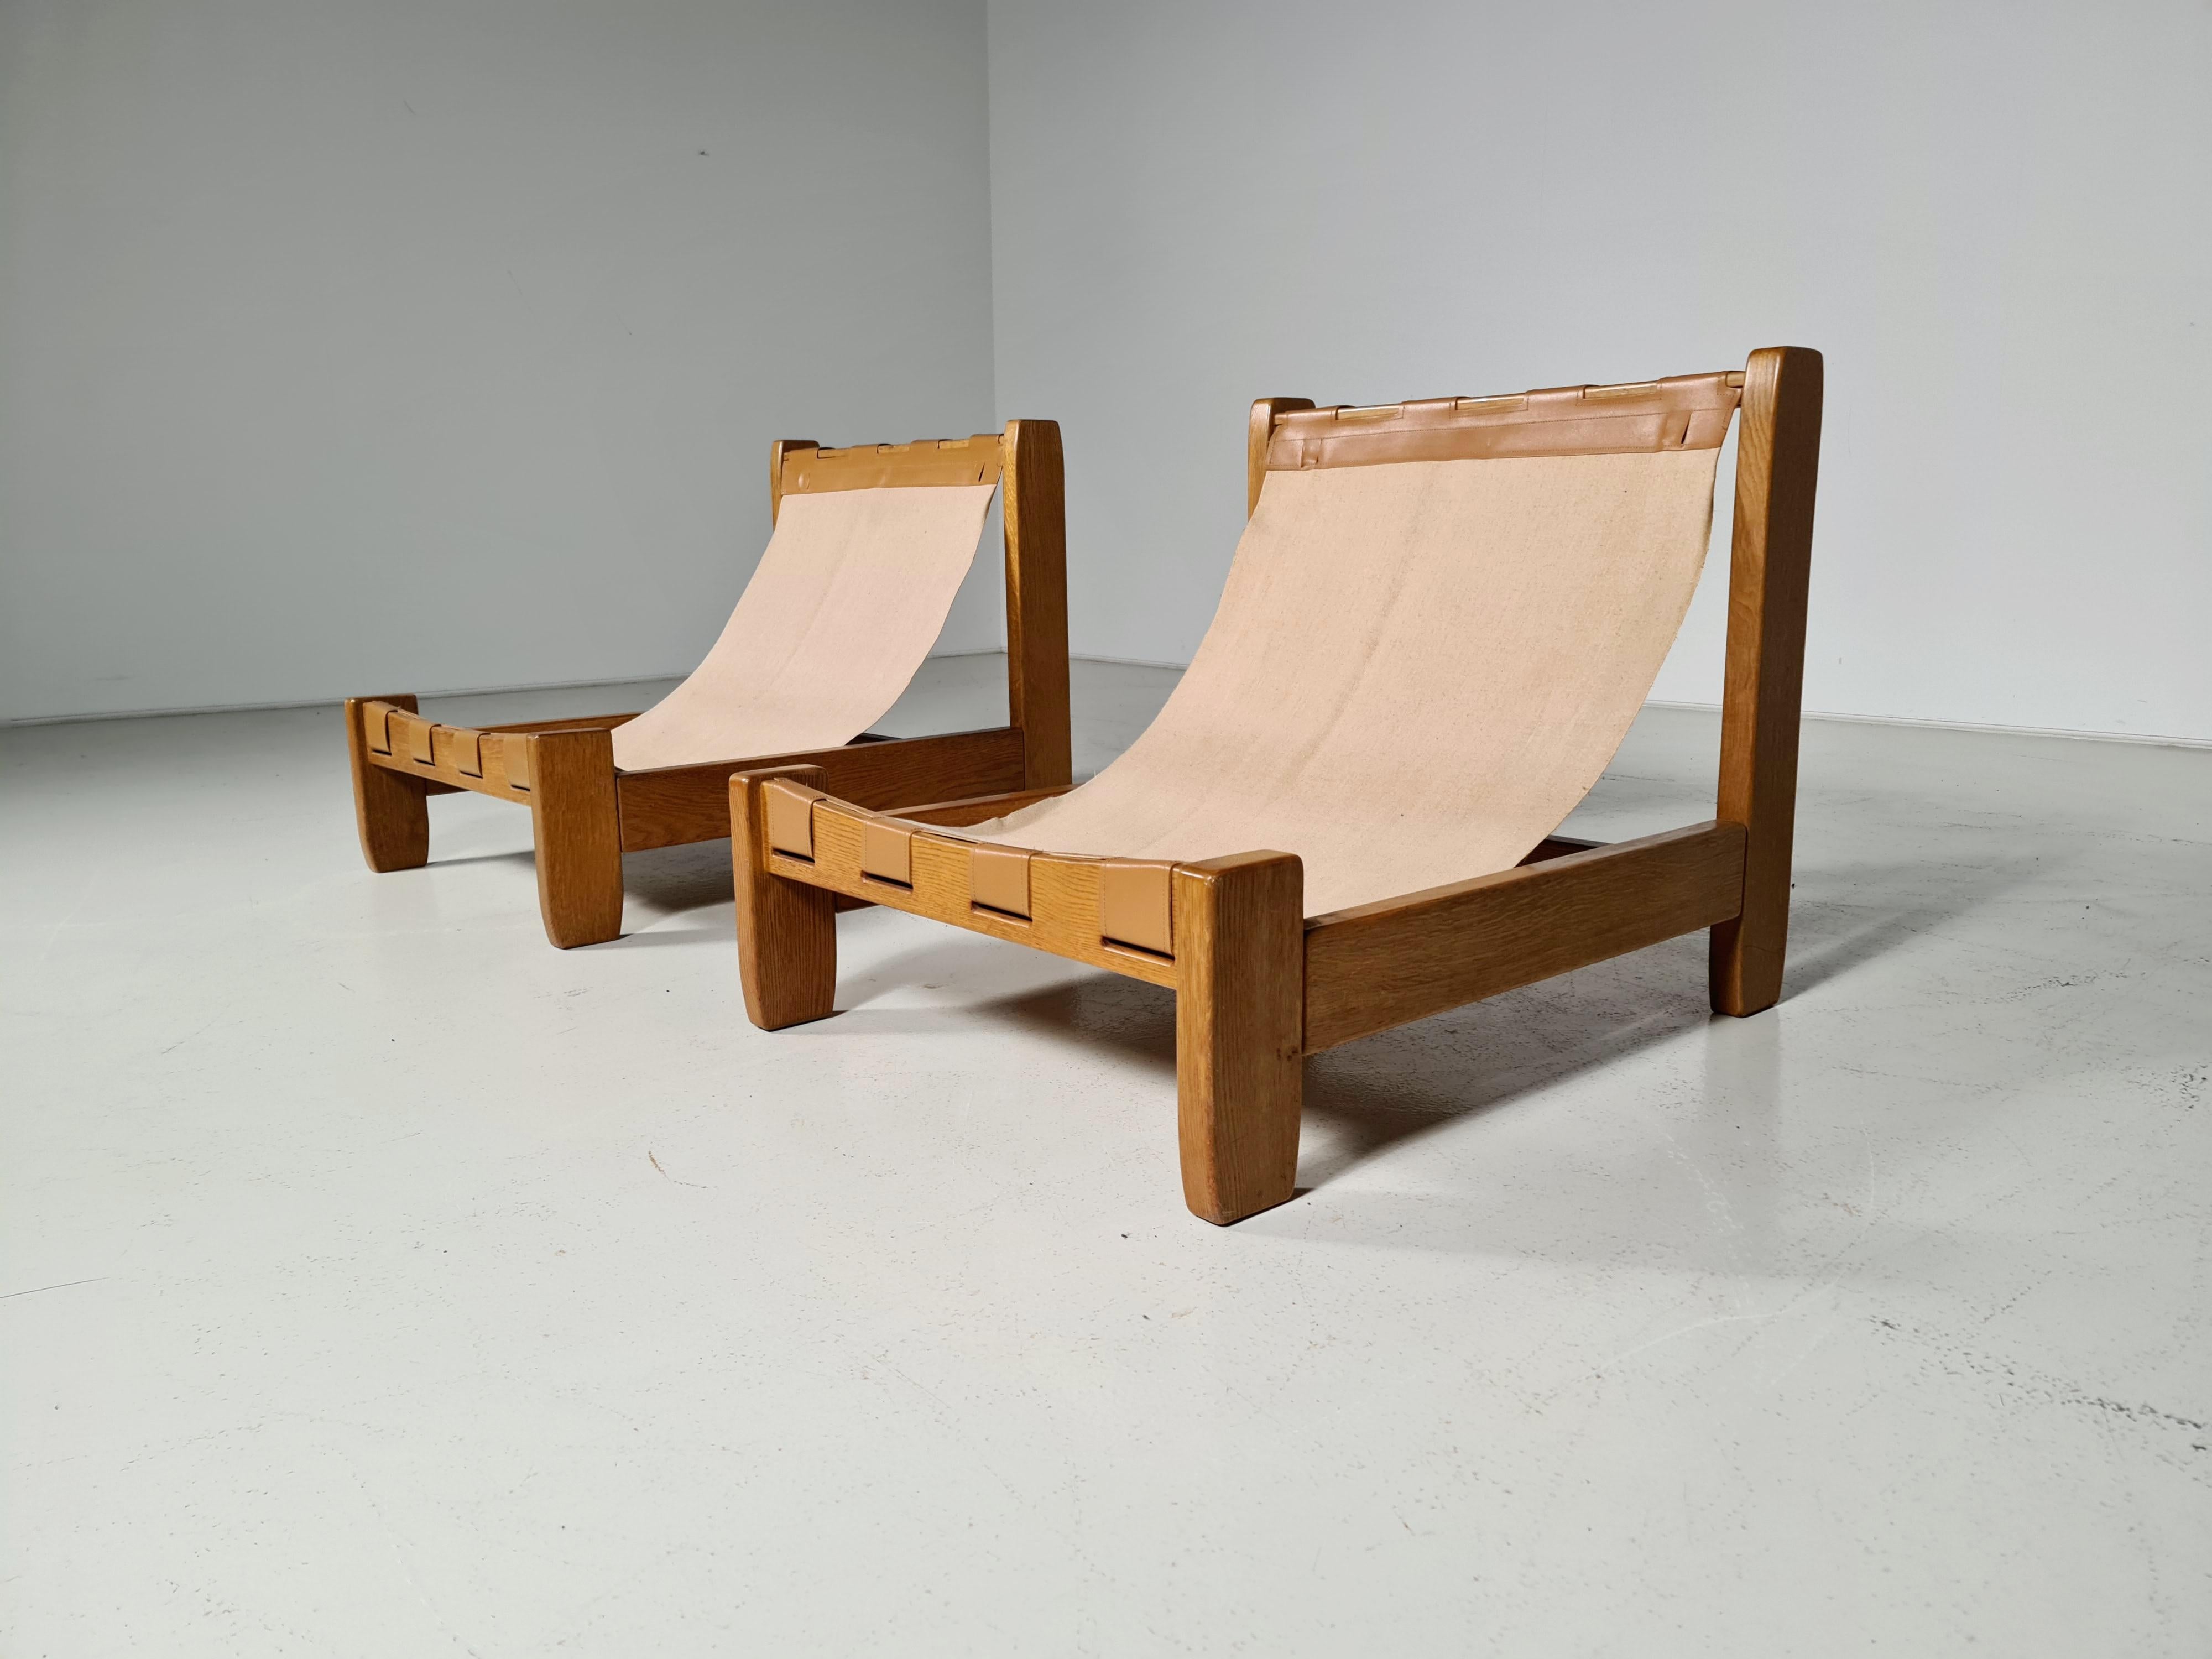 Rare set of oak sling chairs with the original canvas upholstery, the 1970s, France. The canvas seat is connected to the oak frame by a leather construction.